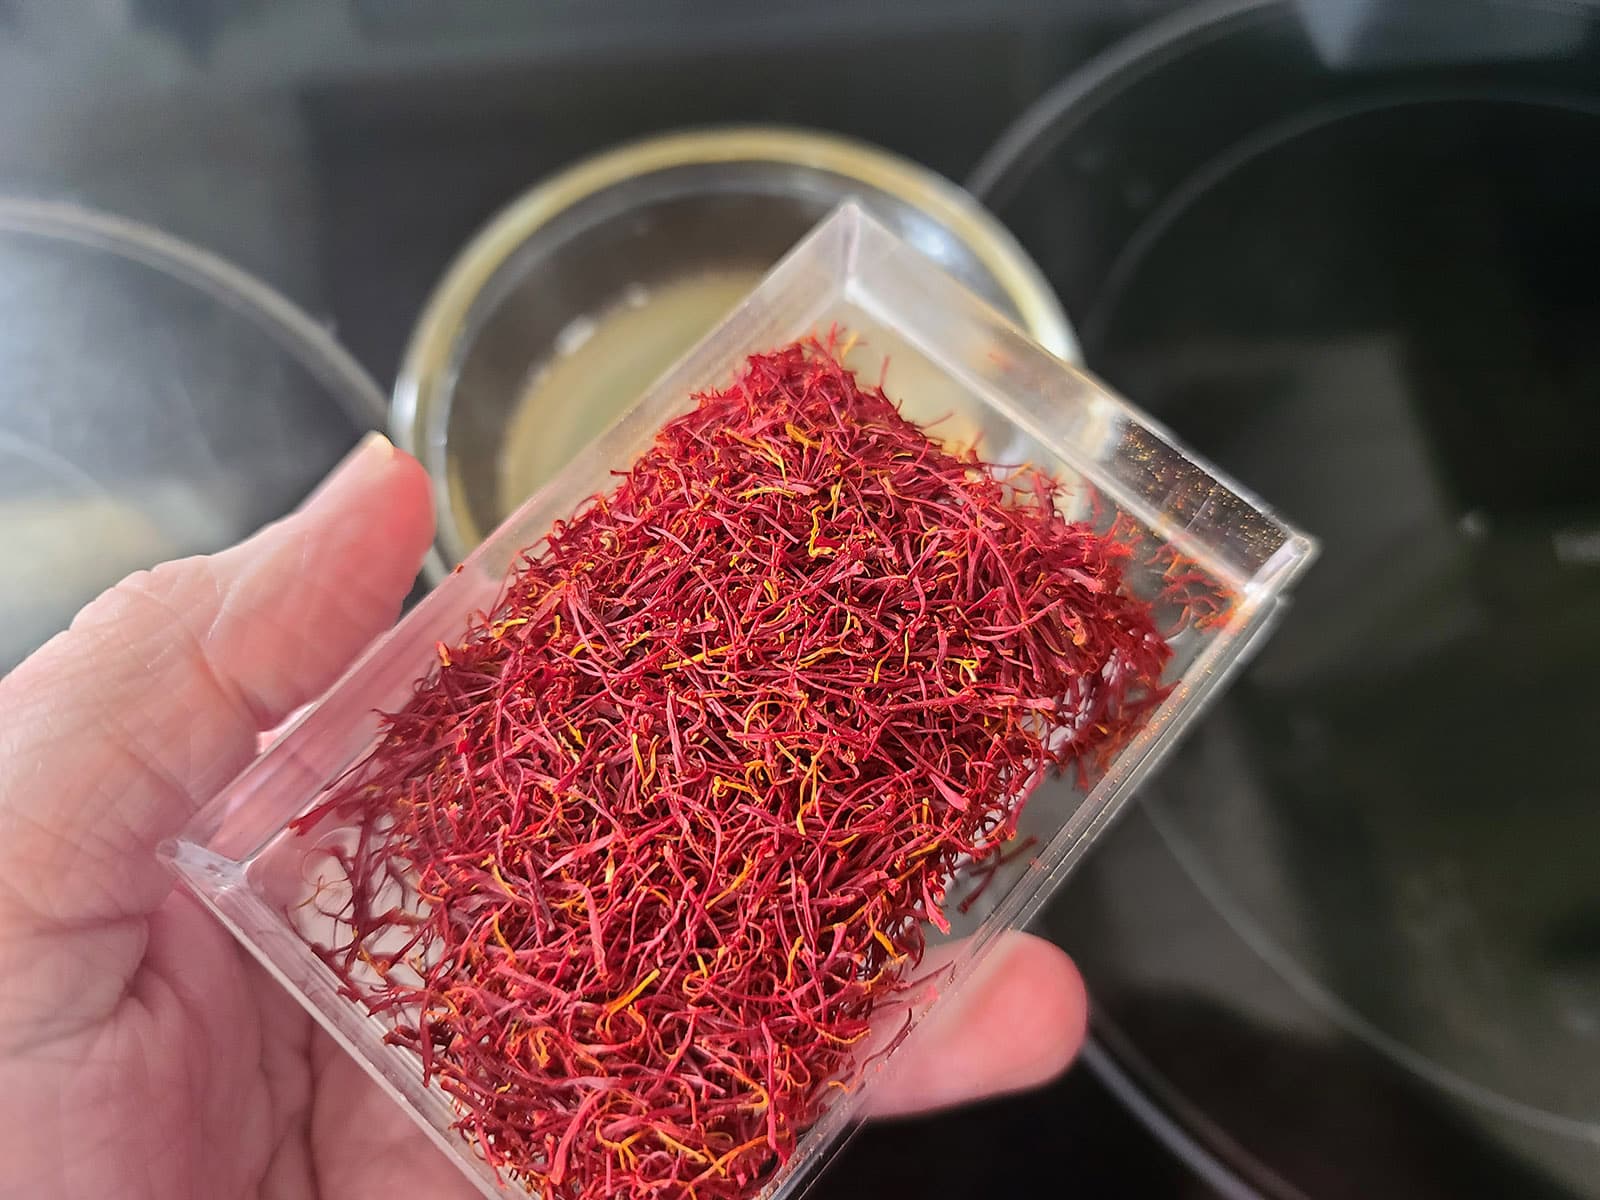 A hand holds up a plastic container of saffron threads.